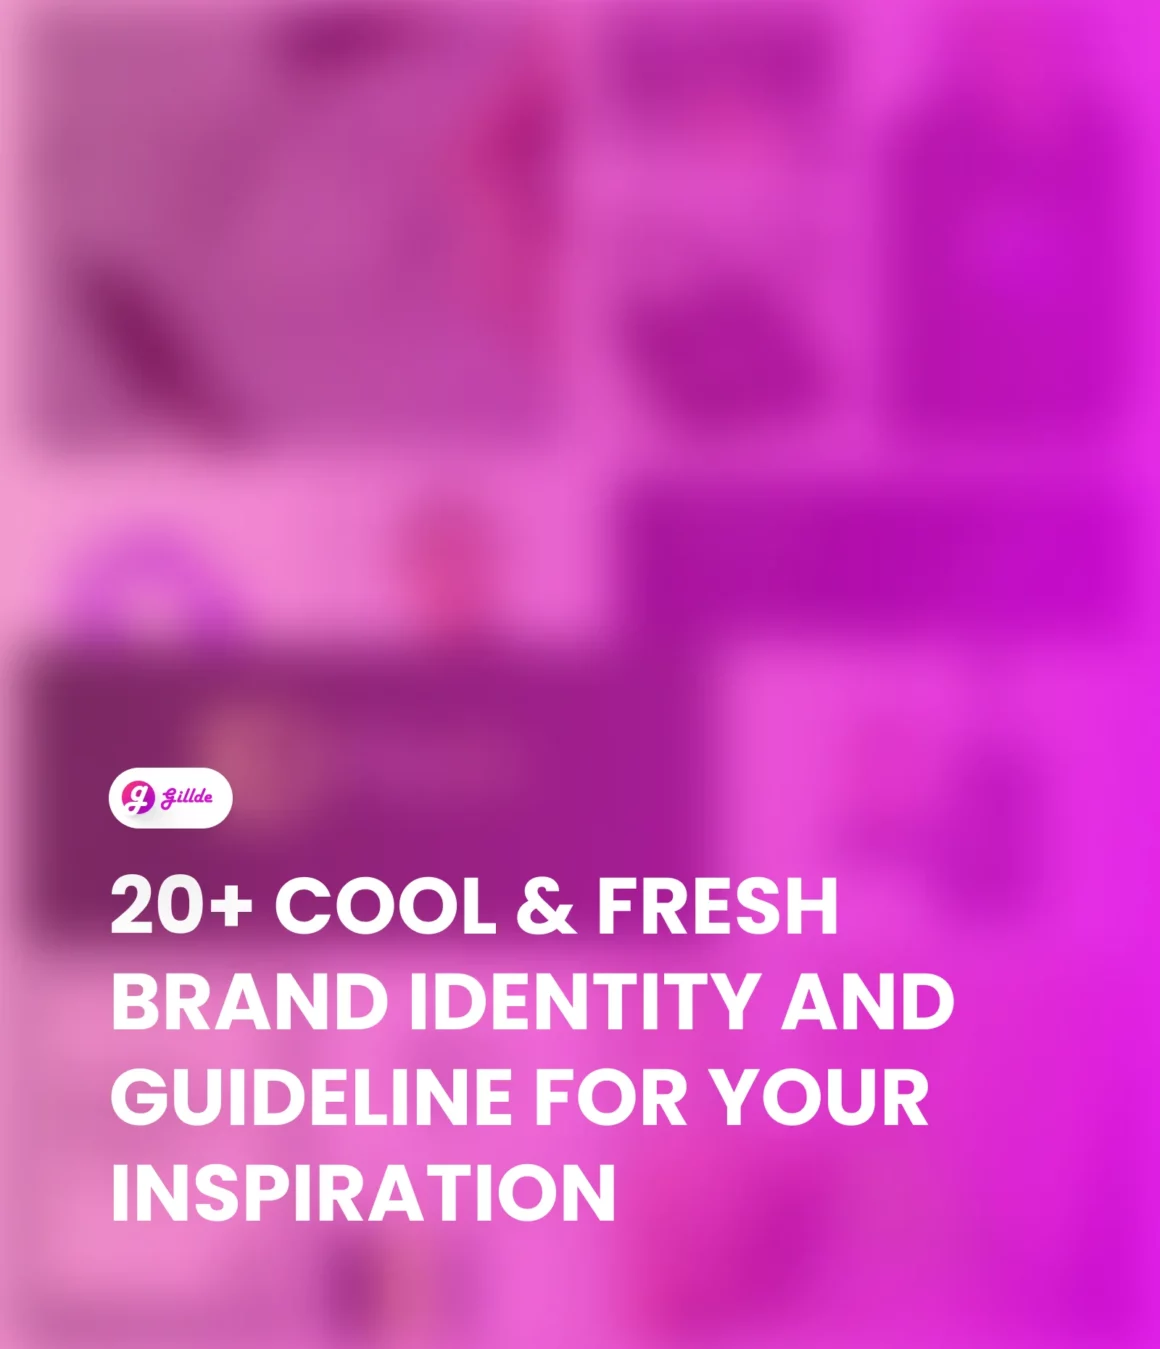 20+ Cool & Fresh Brand Identity and Guideline for your Inspiration